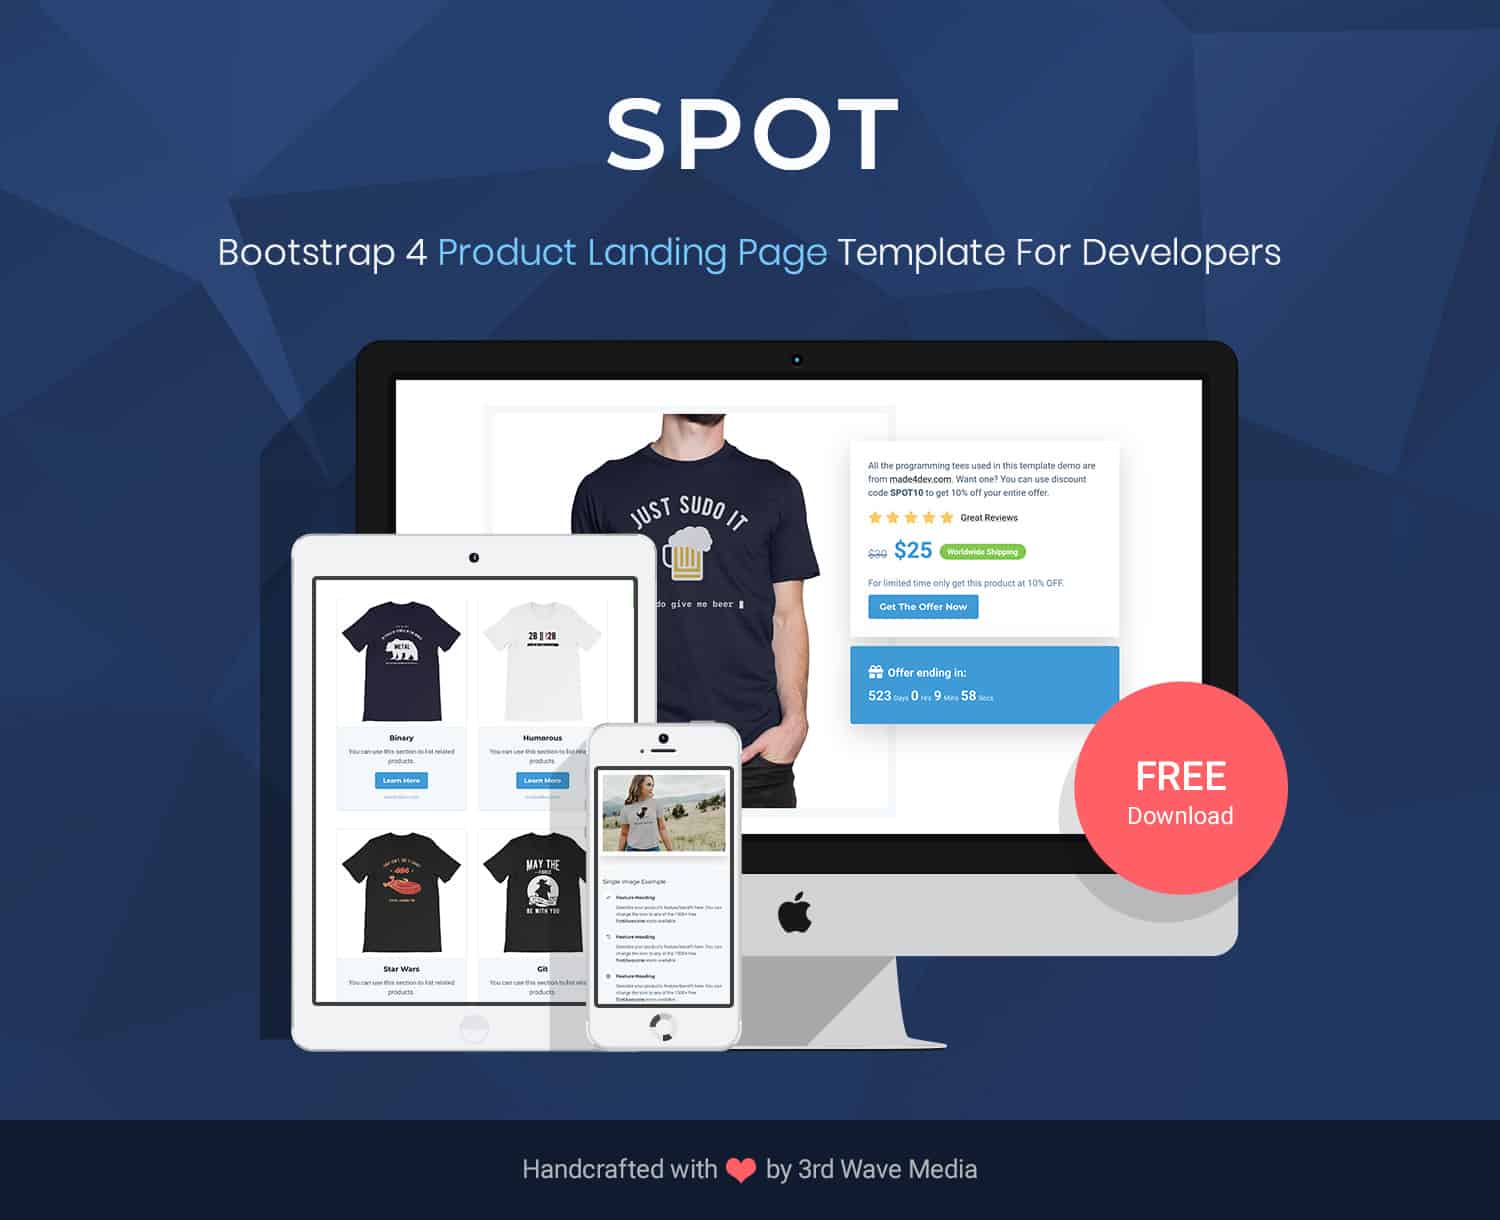 Spot - Bootstrap Product Landing Page Template For Developers